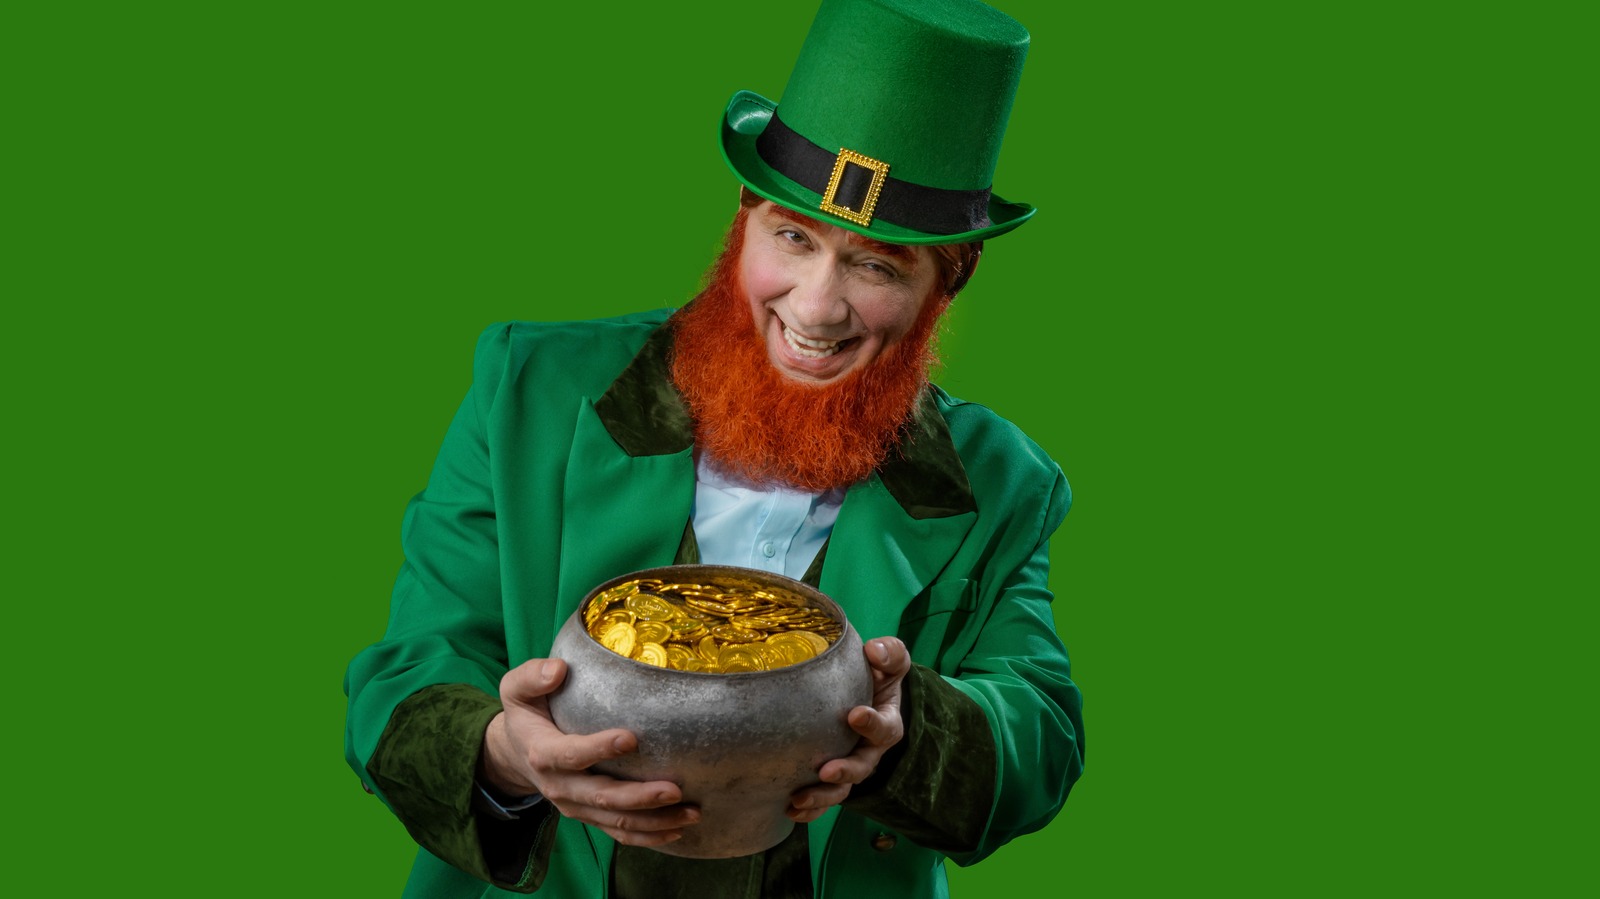 Why Are Leprechauns Associated With St. Patrick's Day?